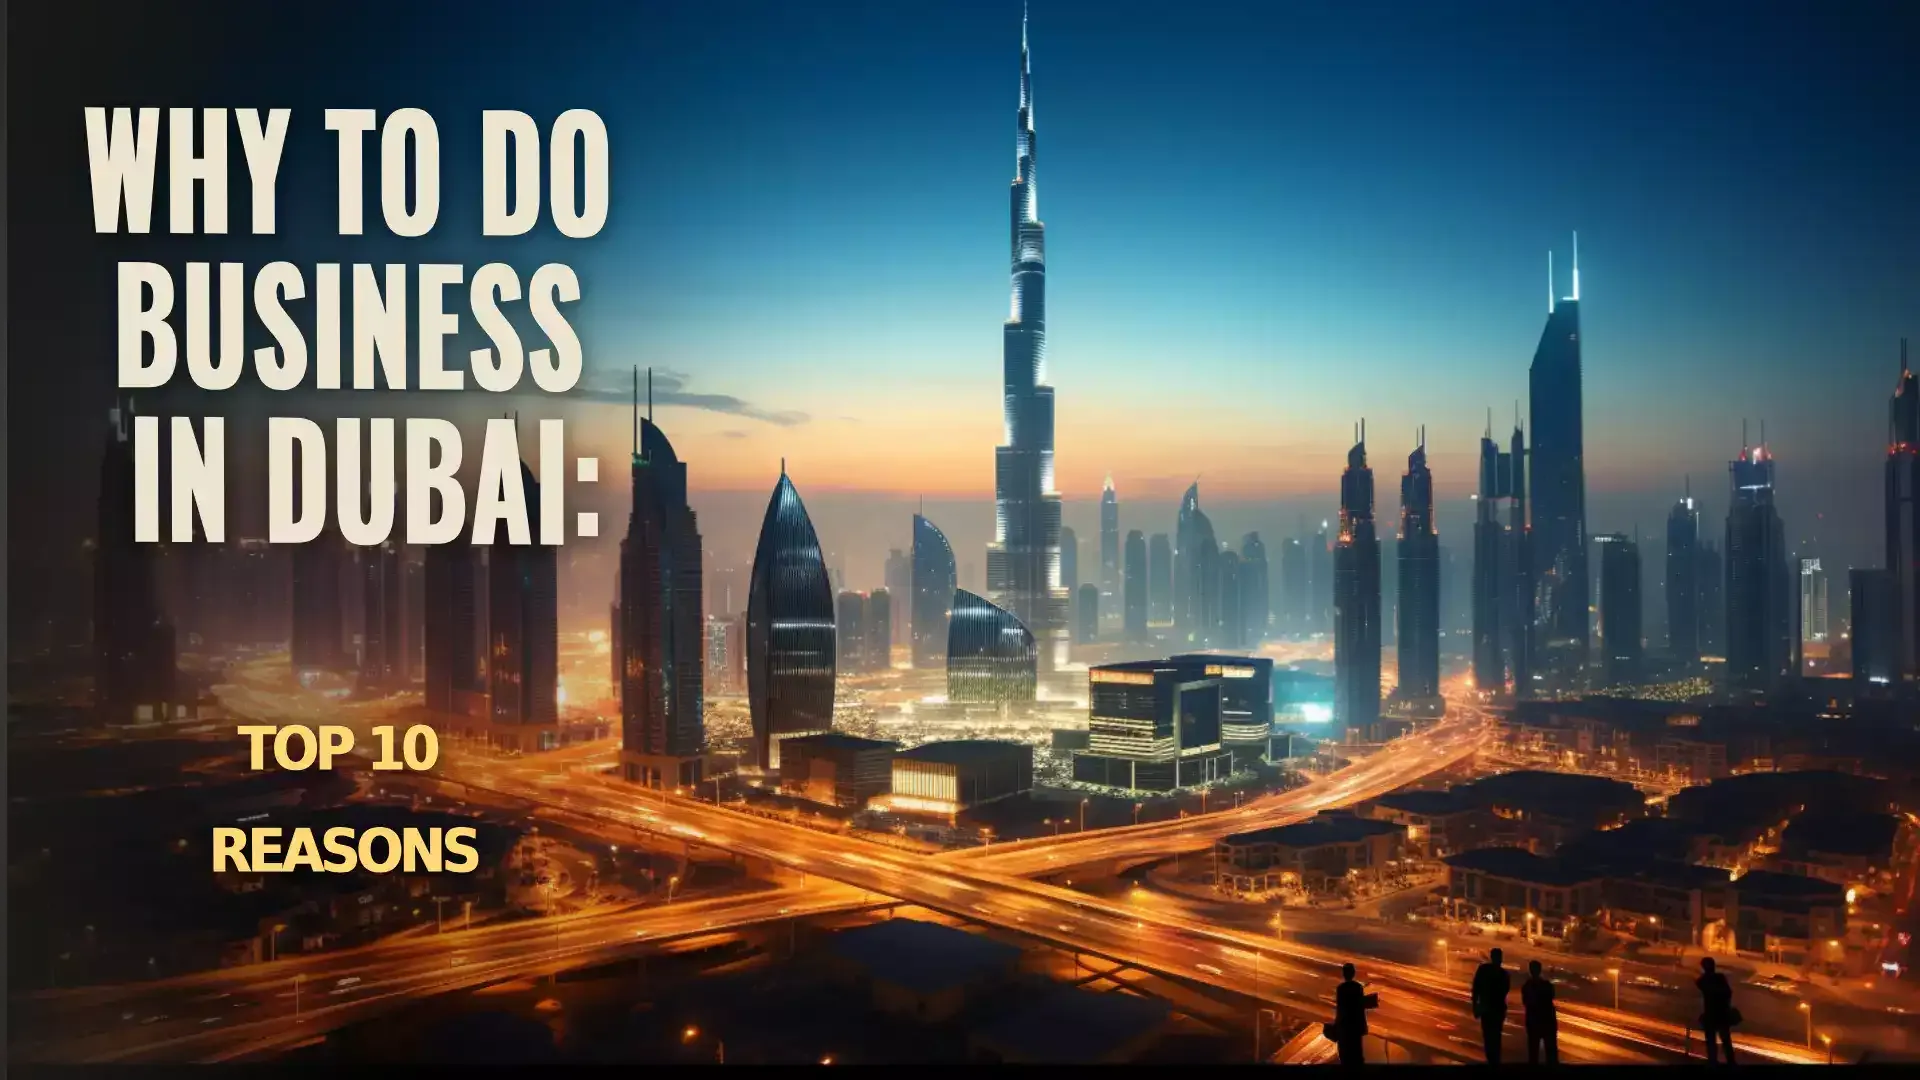 Image showcasing the compelling reasons and advantages of doing business in Dubai